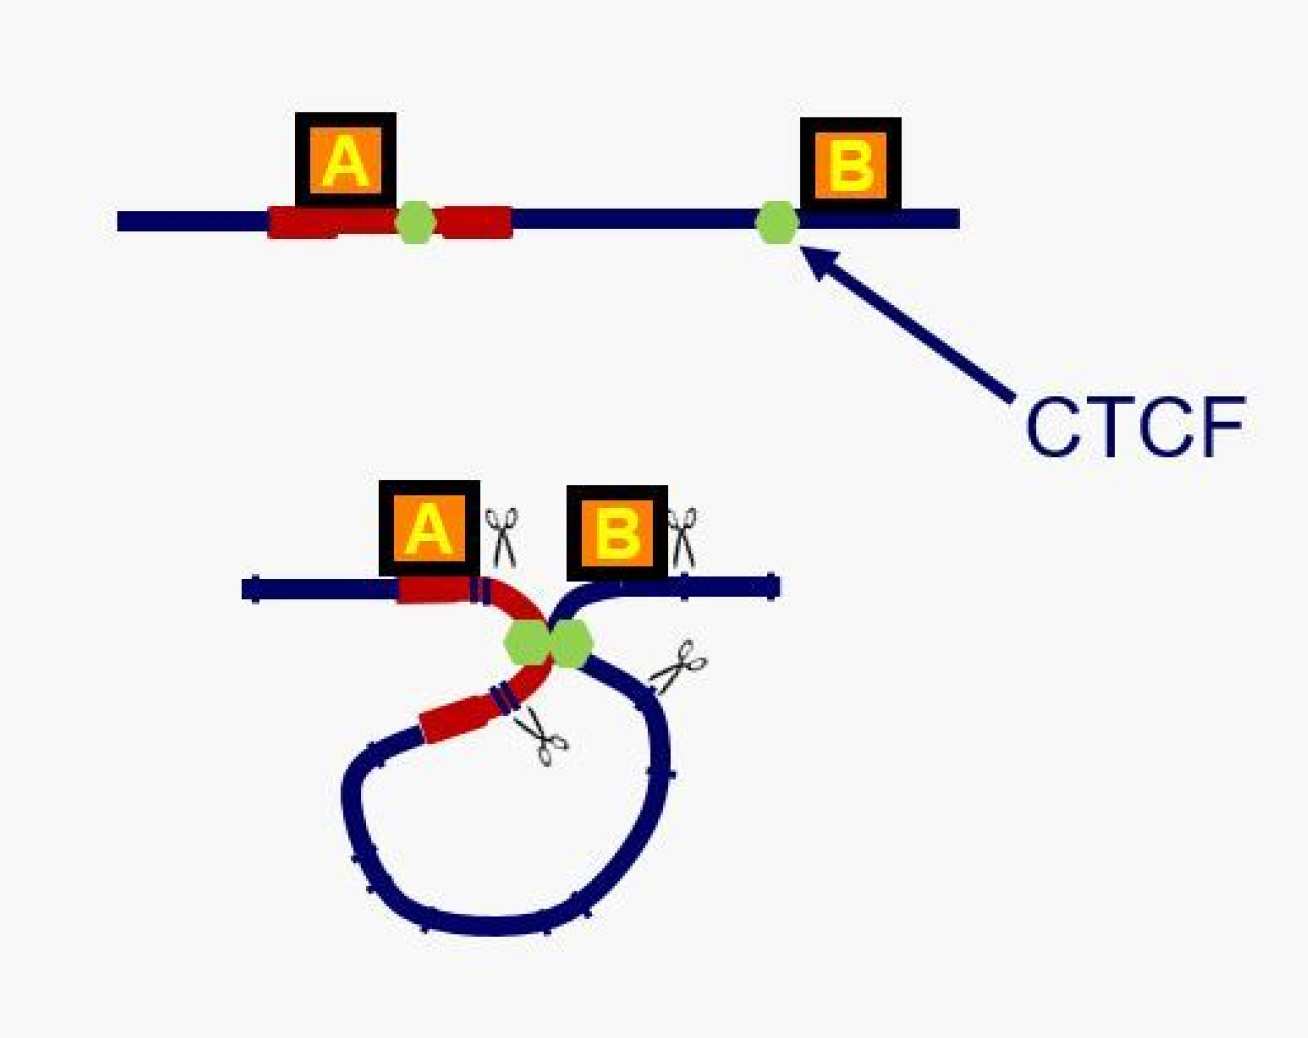 The team found that HTLV-1 binds to proteins called CTCFs, which form chromatin loops throughout the human genome